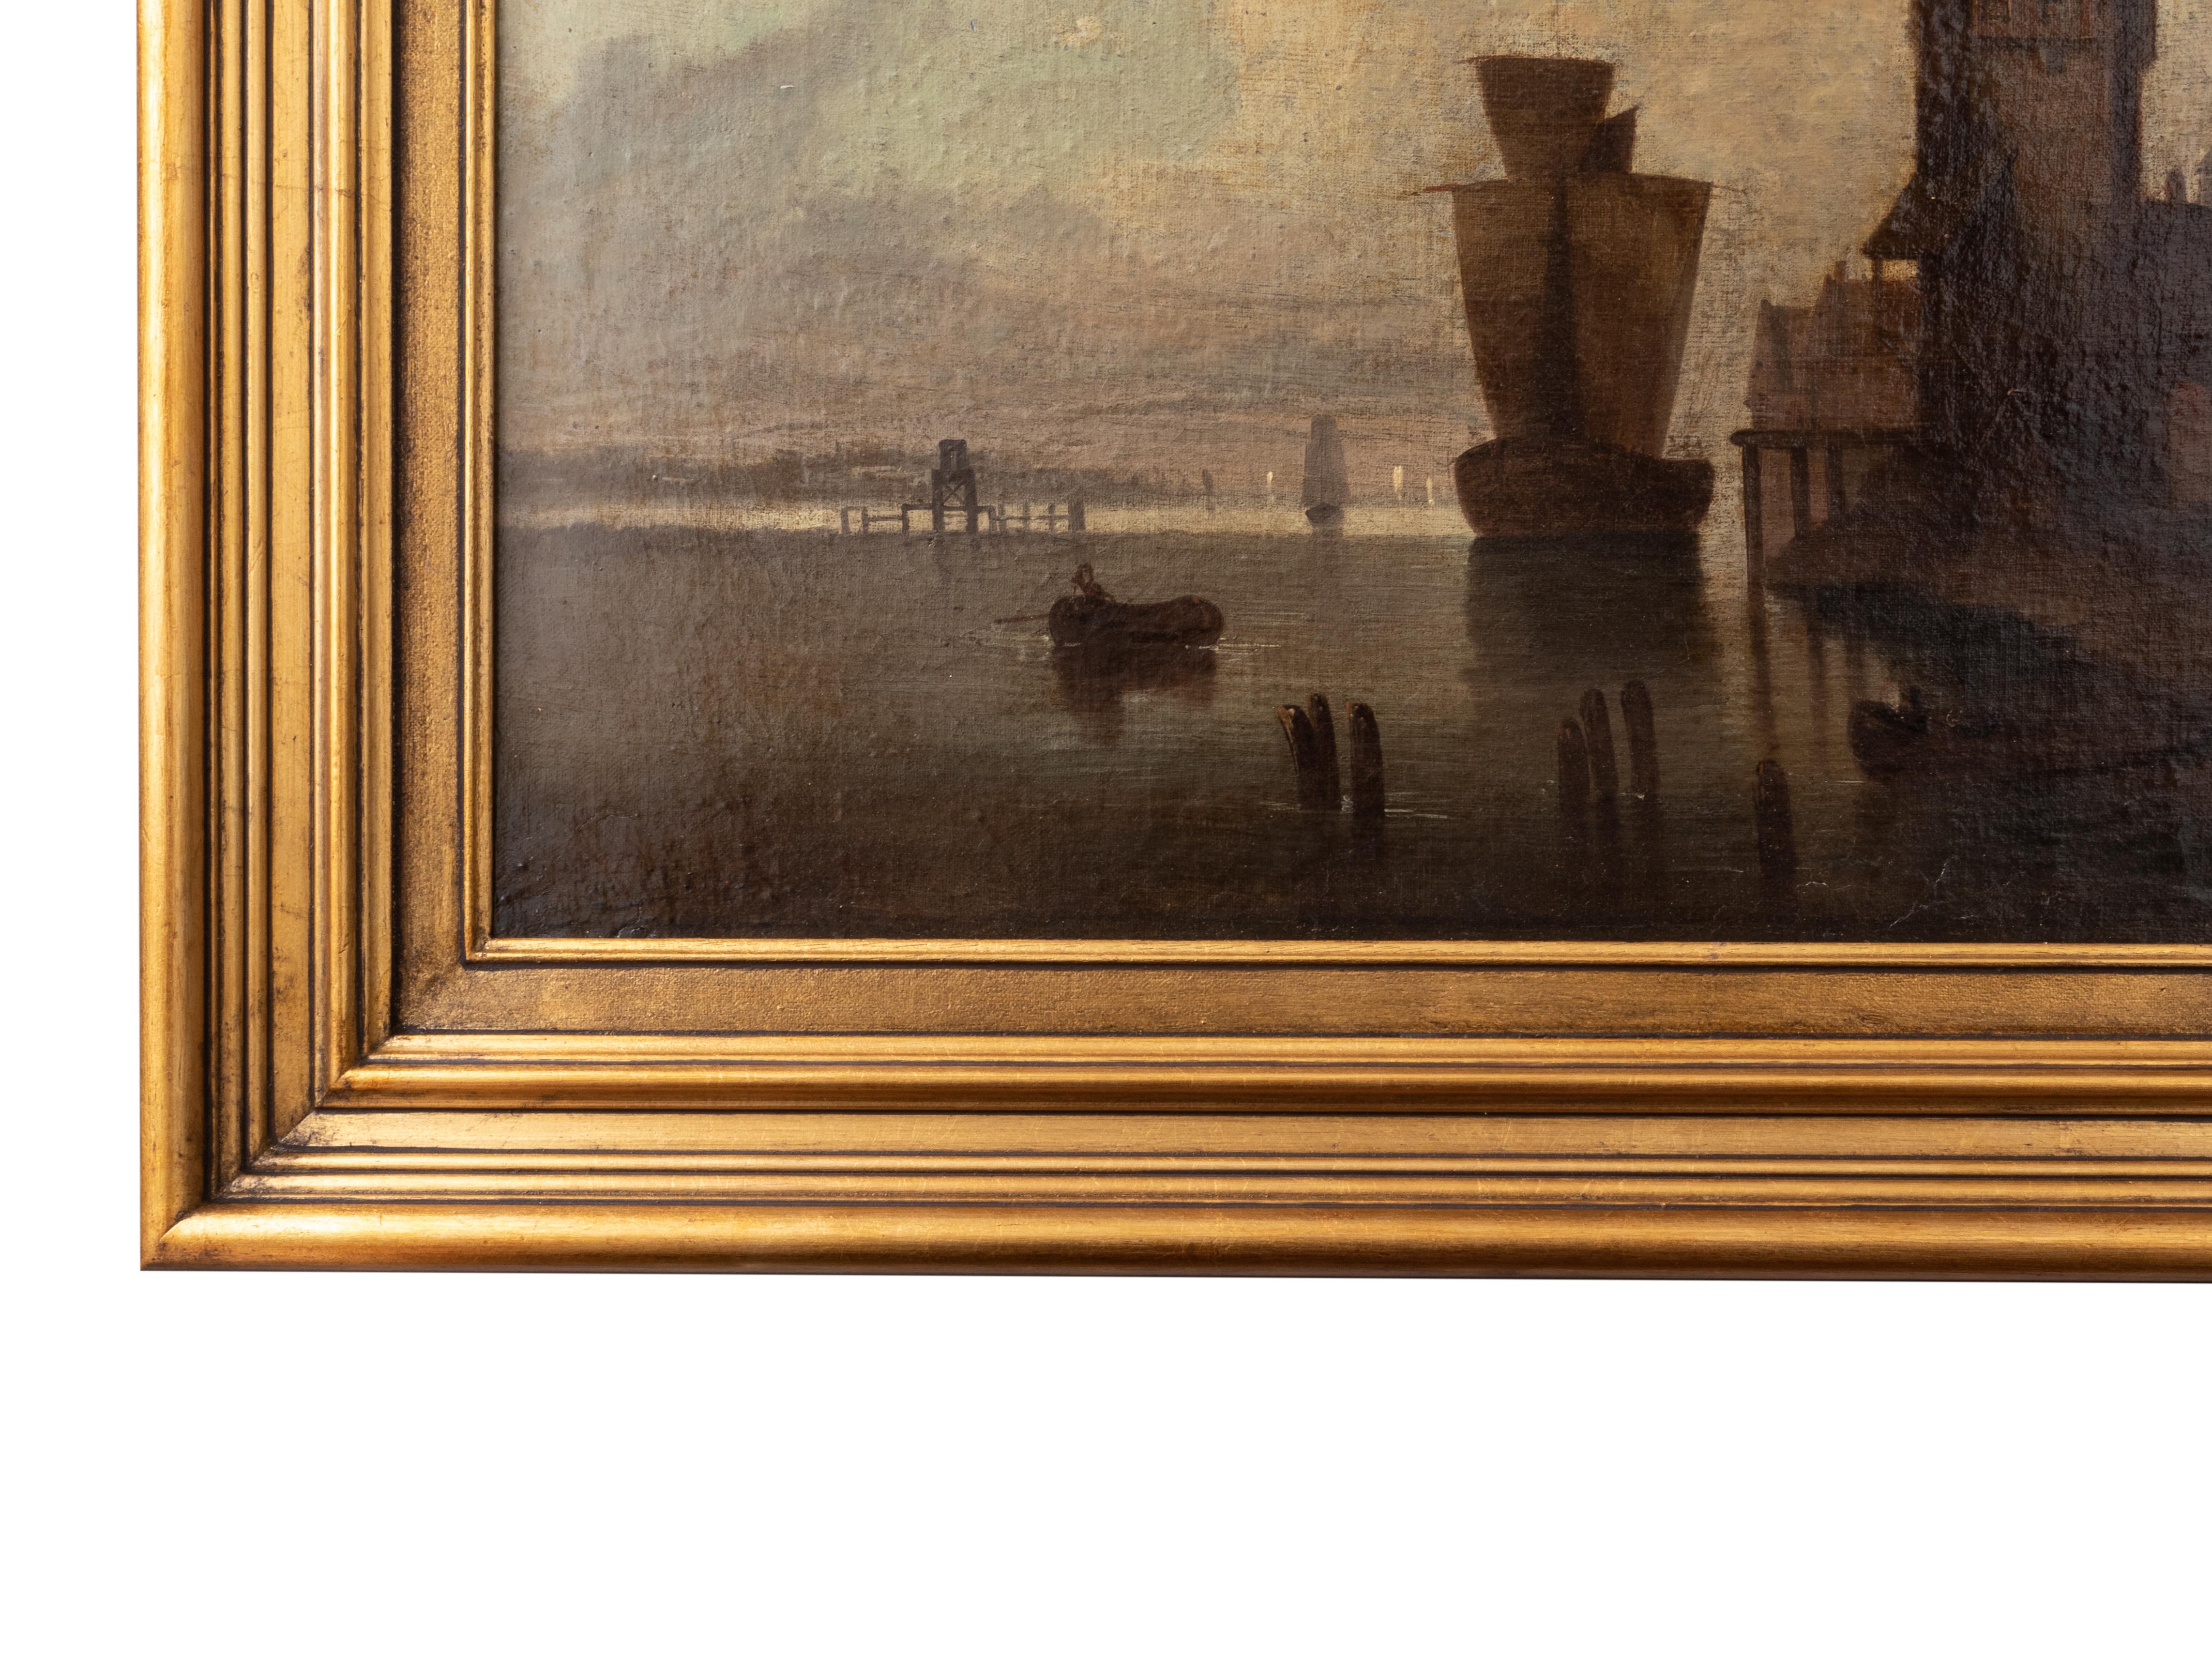 Landscape painting of a dutch harbor at dawn with a caravel sail and a boat in the background with Flemish buildings, in sfumato technique, dated '1879' and signed 'Roudil'.
Frame 86.5 x 60 cm 
canvas 68 x 42.5 cm

